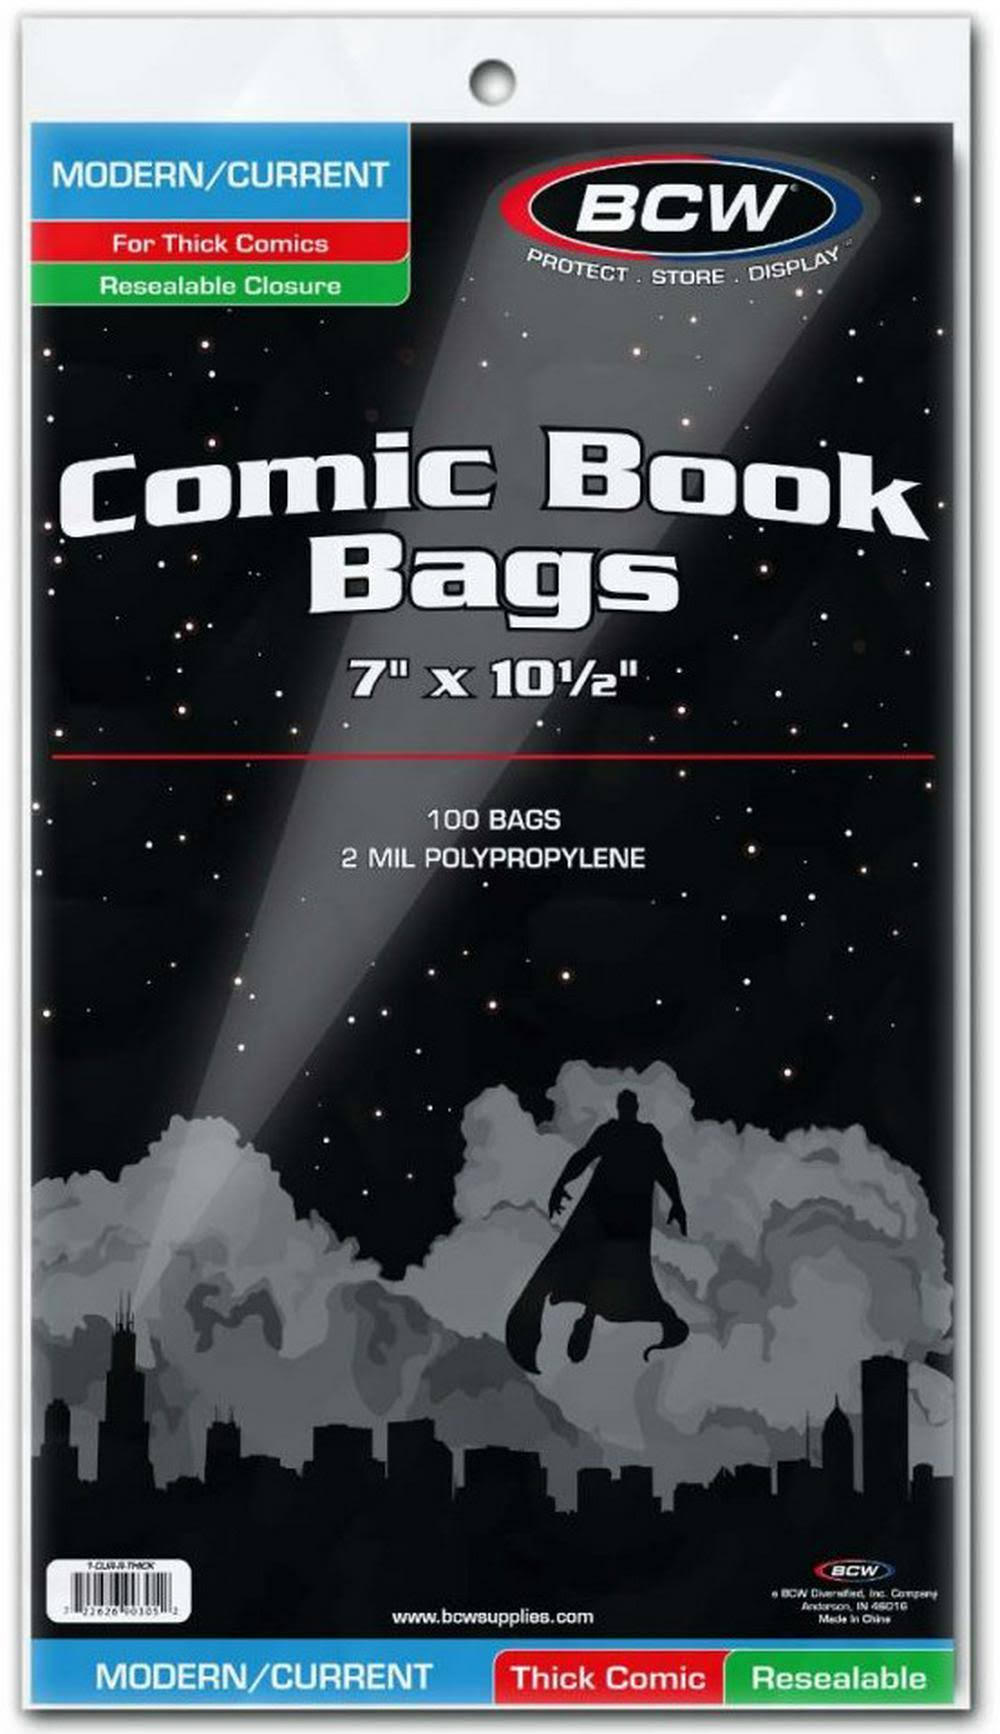 BCW Comic Book Bags Resealable Modern Current Thick 100 Bags Per Pack #39161